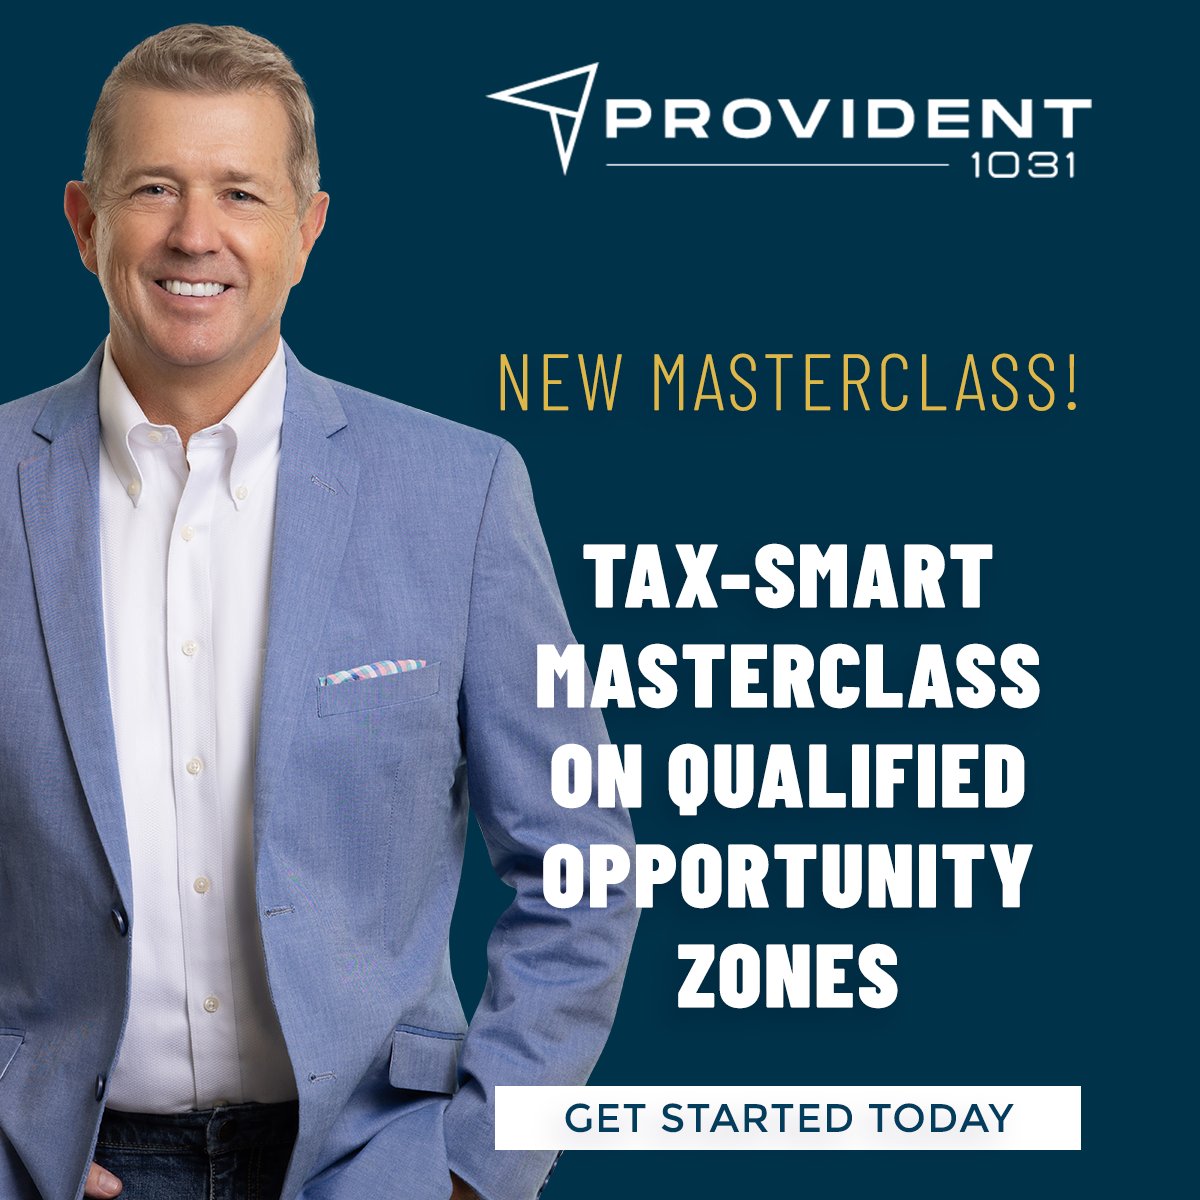 Daniel Goodwin, chief investment strategist at Provident 1031, has released a new masterclass that decodes what some are calling one of the best tax advantages in a generation. 'Qualified Opportunity Zones: Master QOZ is available now at bit.ly/3mt20BN.